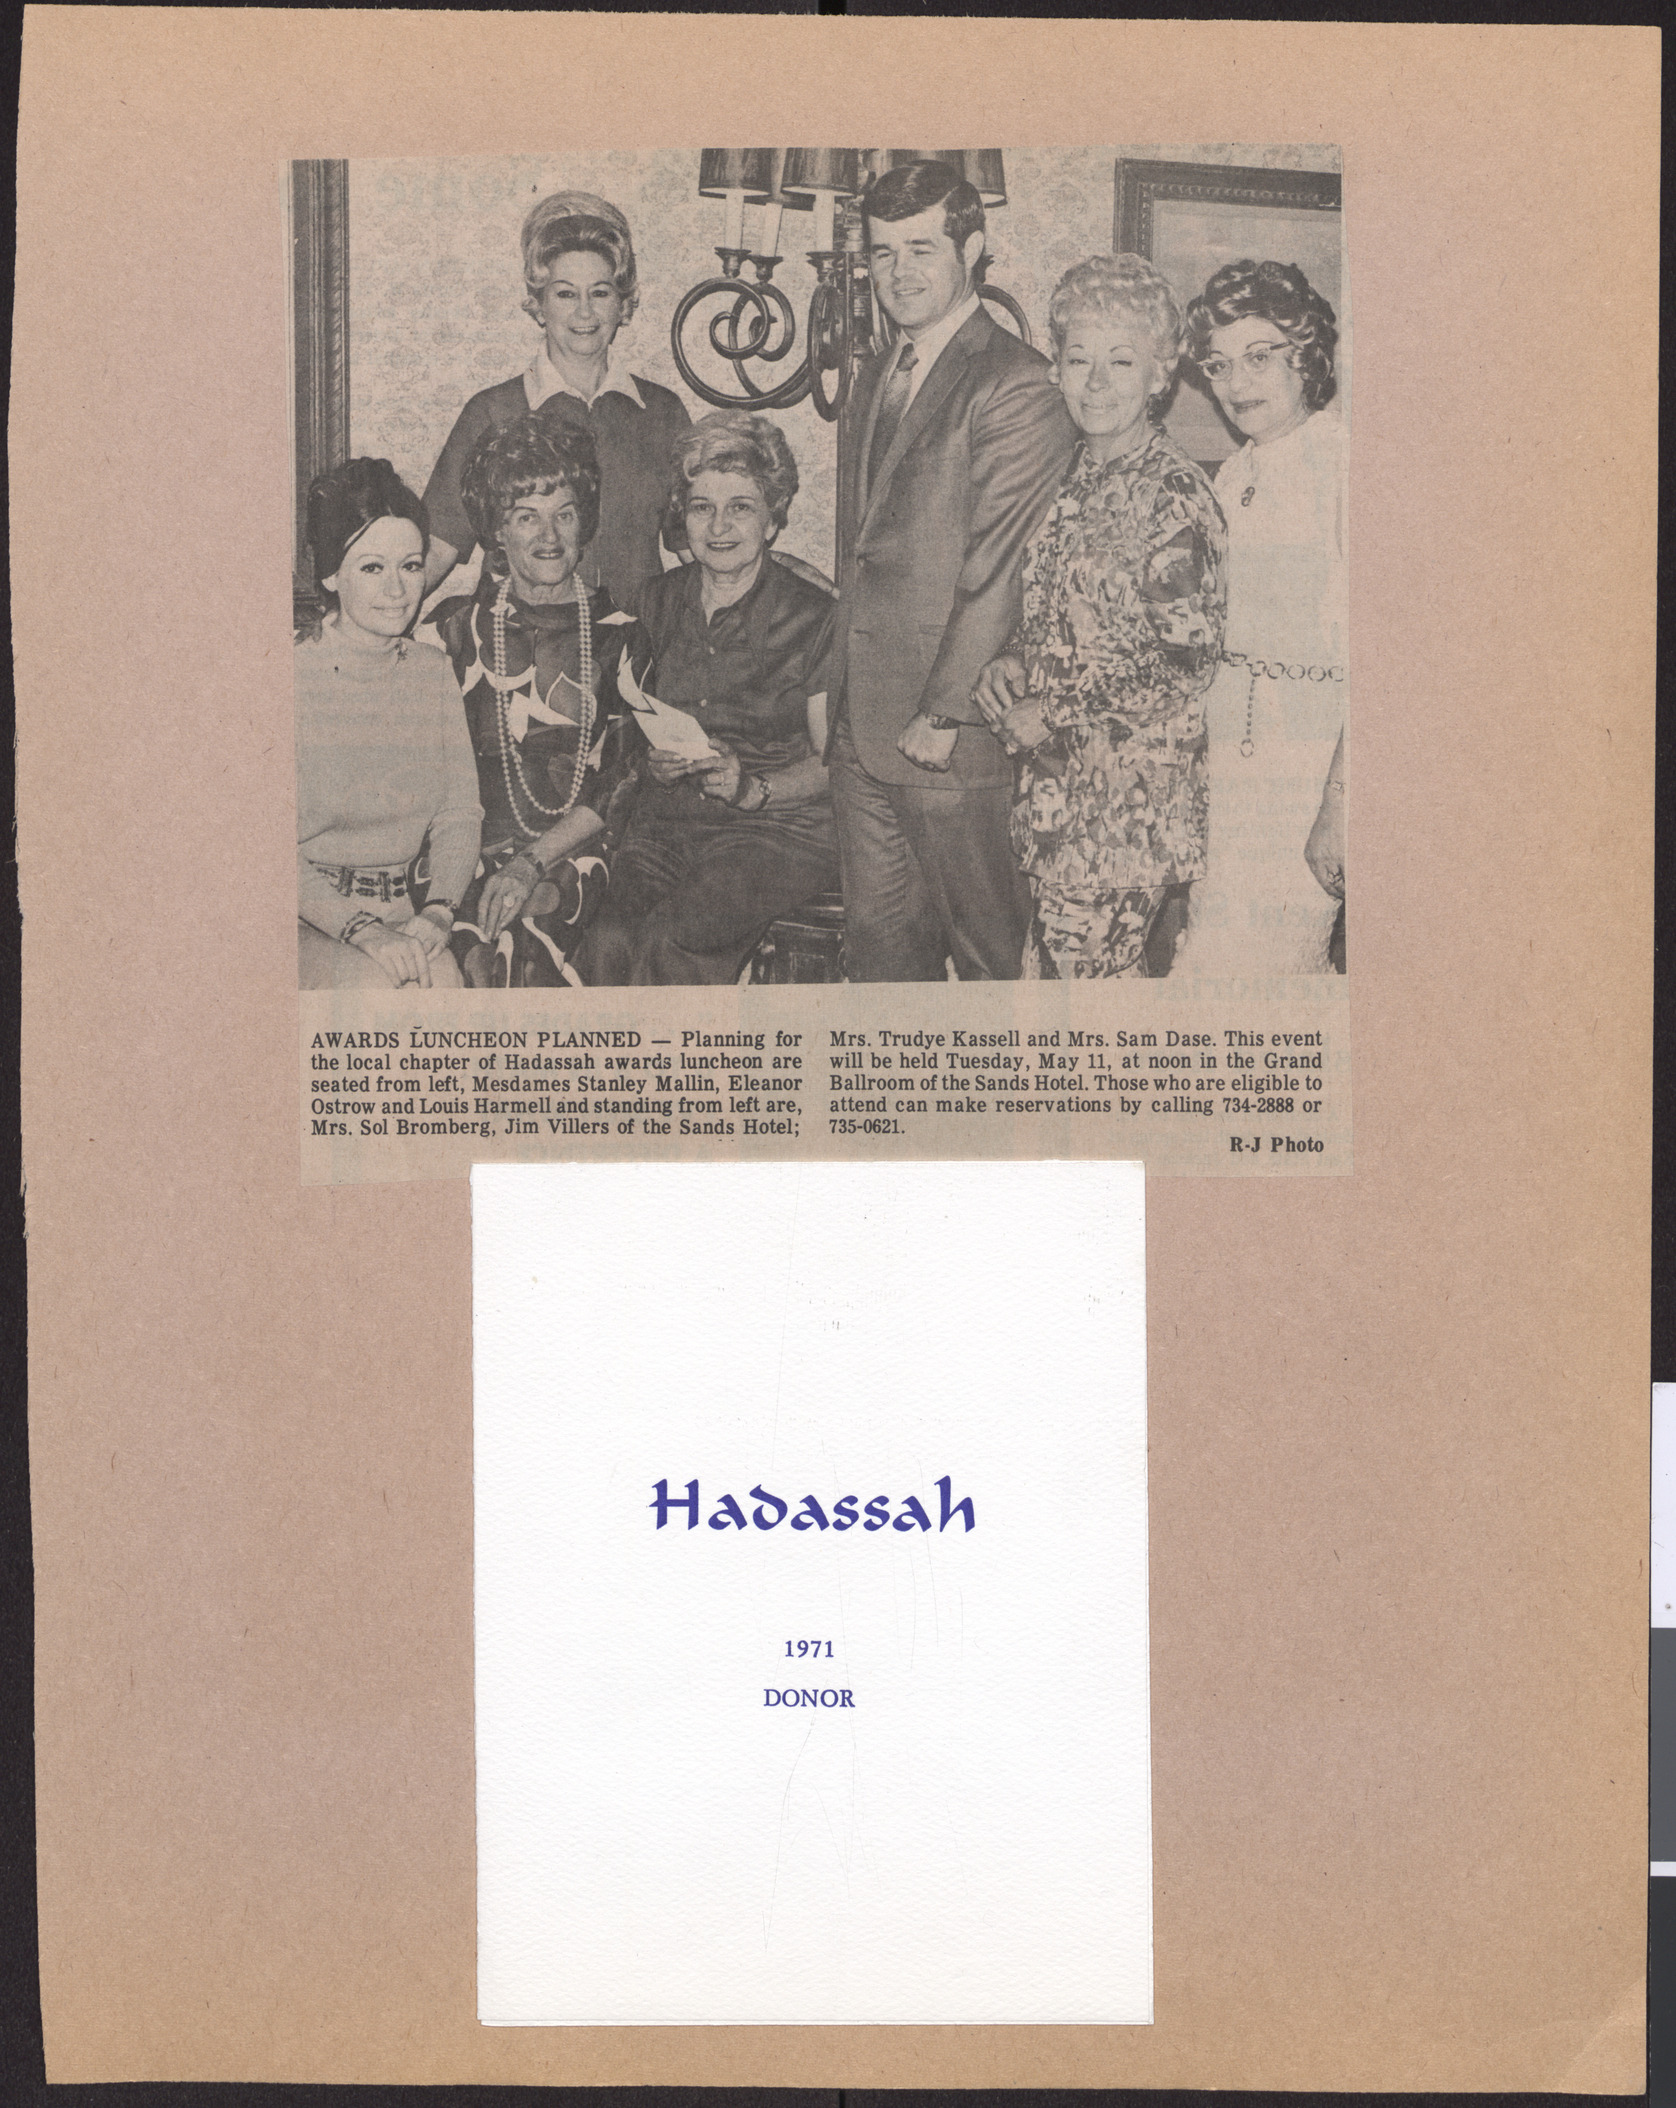 Newspaper clipping, Awards Luncheon Planned, Las Vegas Review-Journal, date unknown, and Hadassah invitation to 1971 donor luncheon